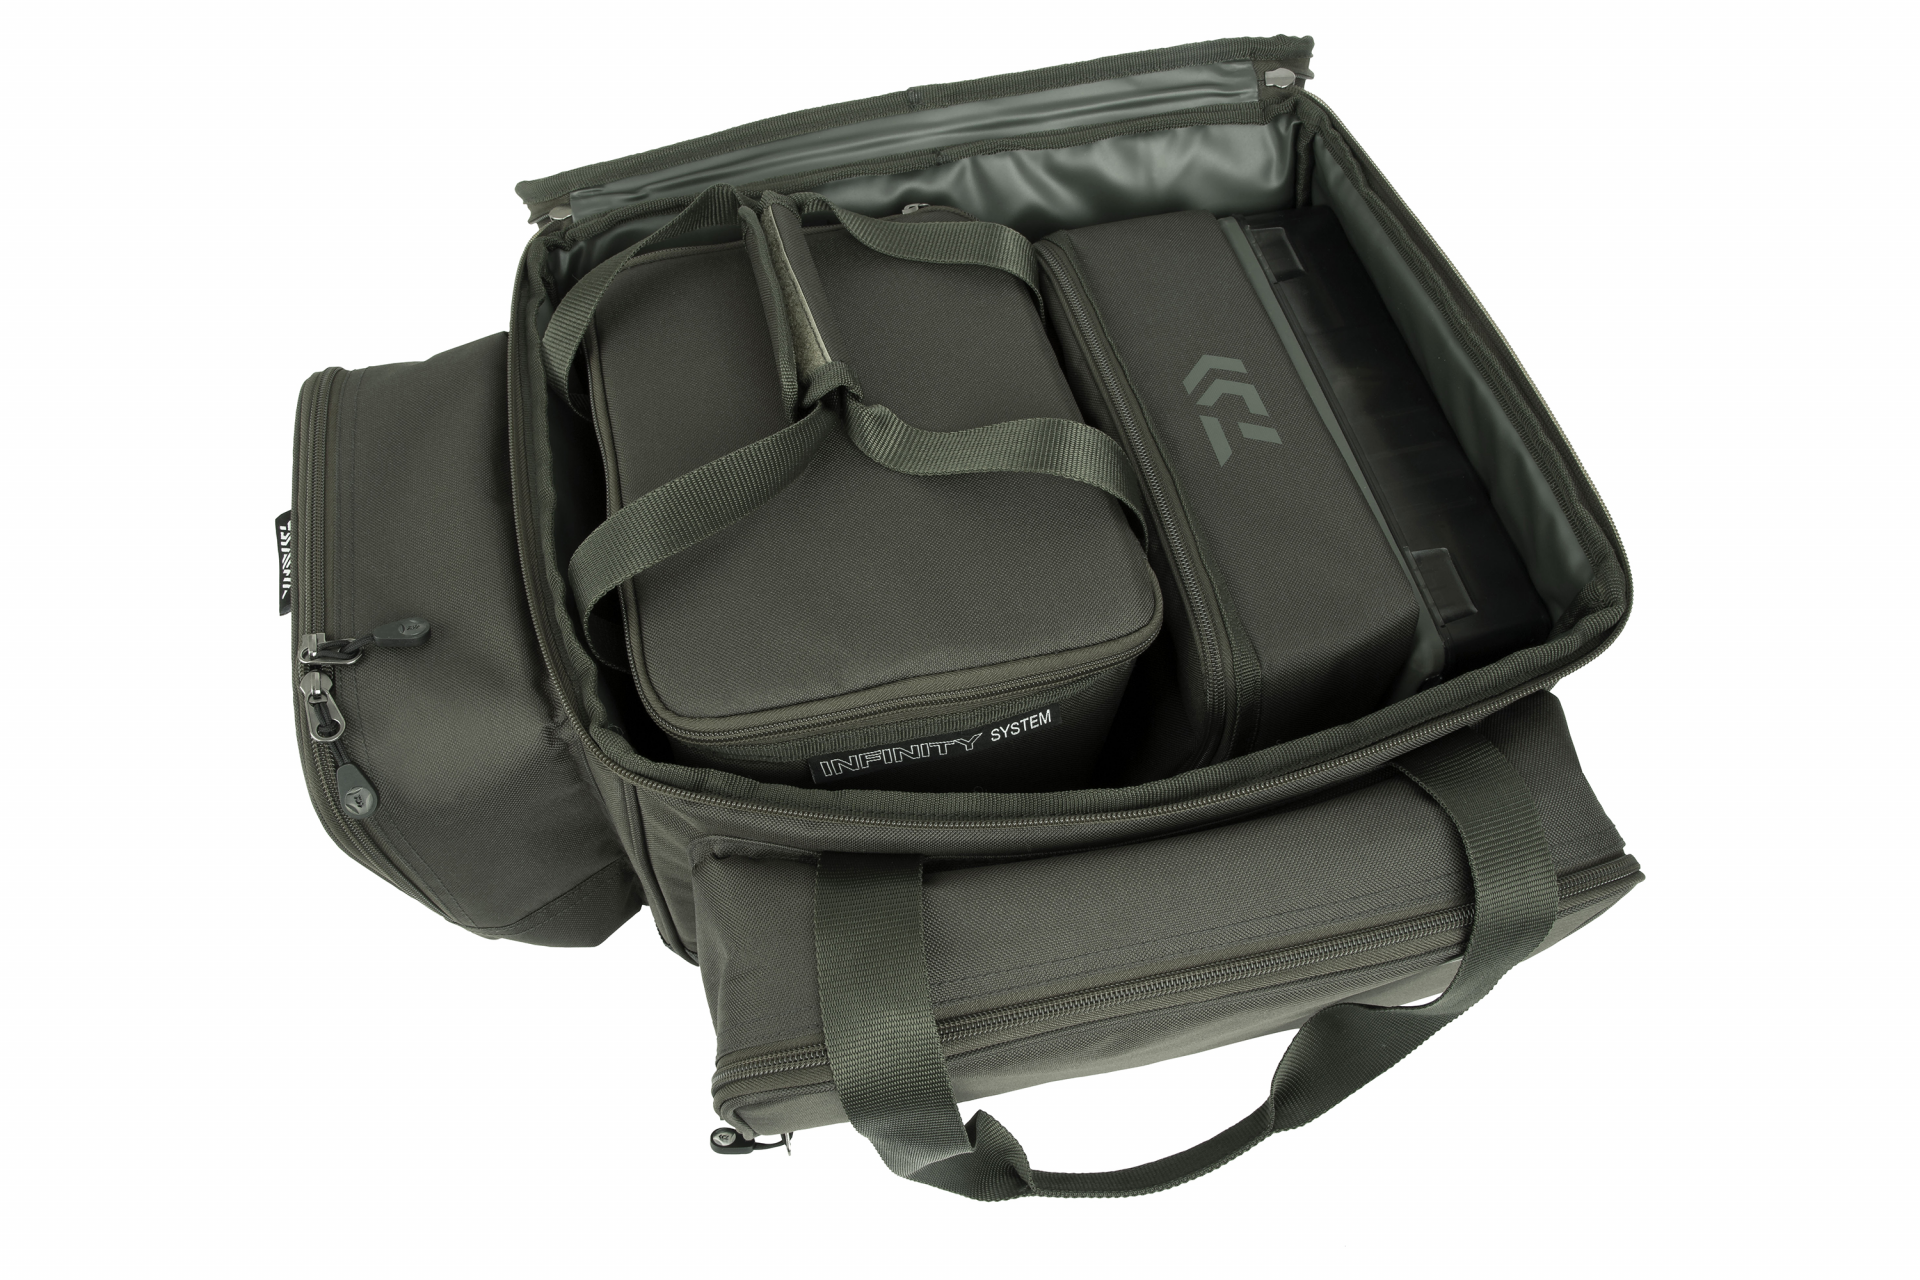 Infinity® System Low Level Rucksack <span>| System carp bag | with backpack carrying system</span>